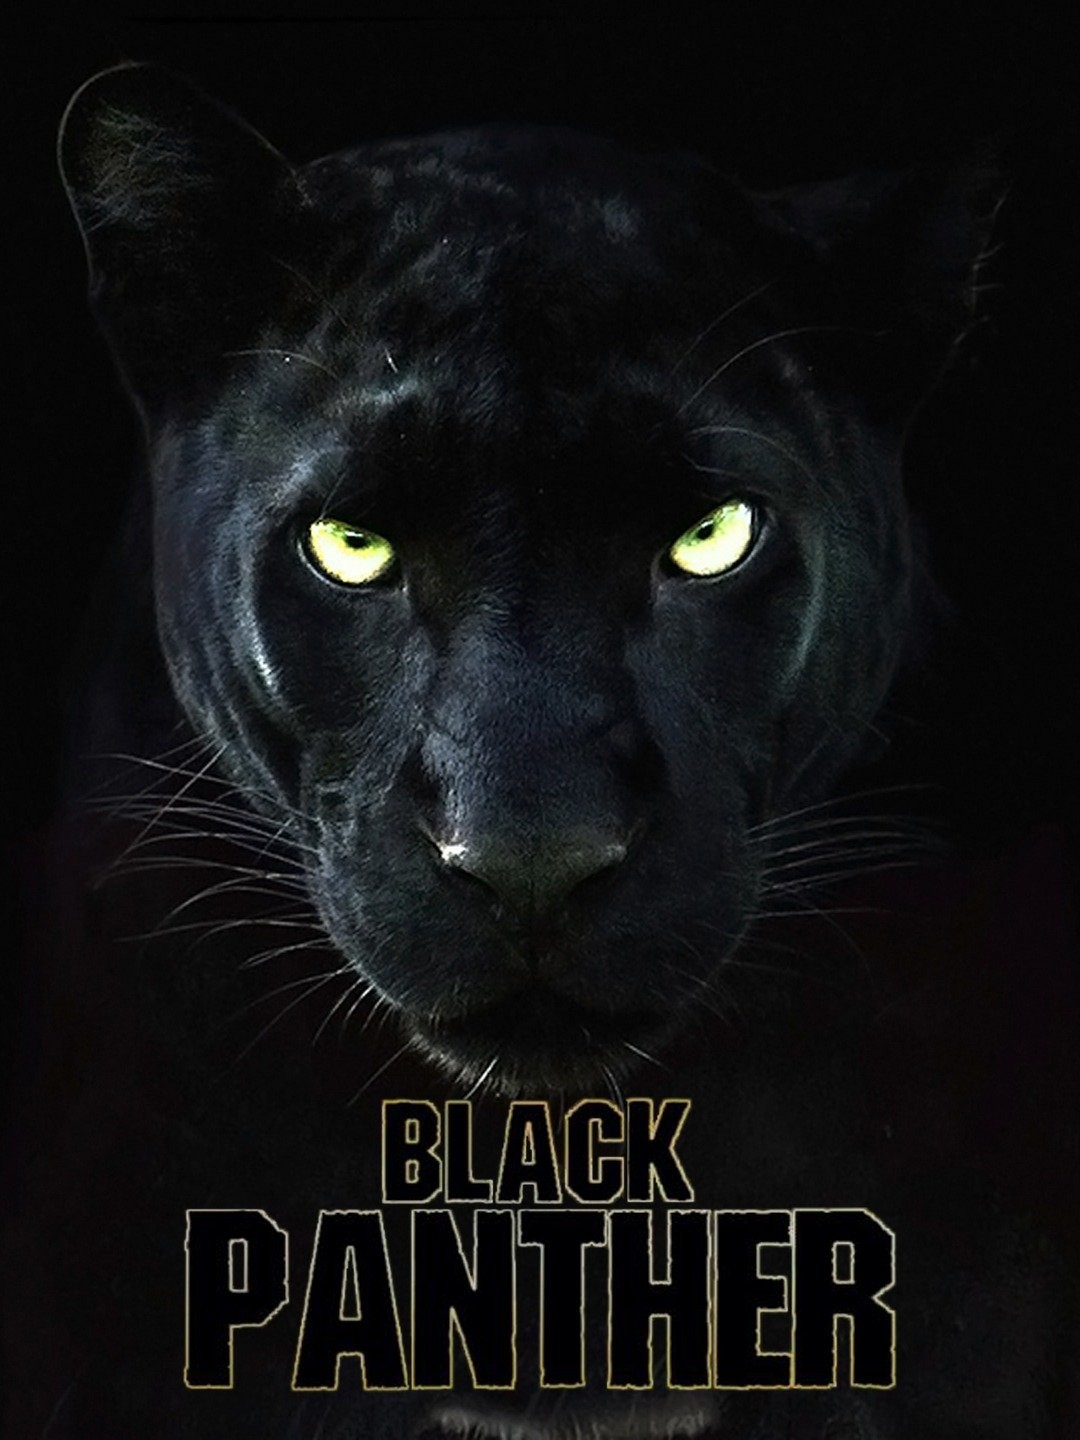 The Real Black Panther